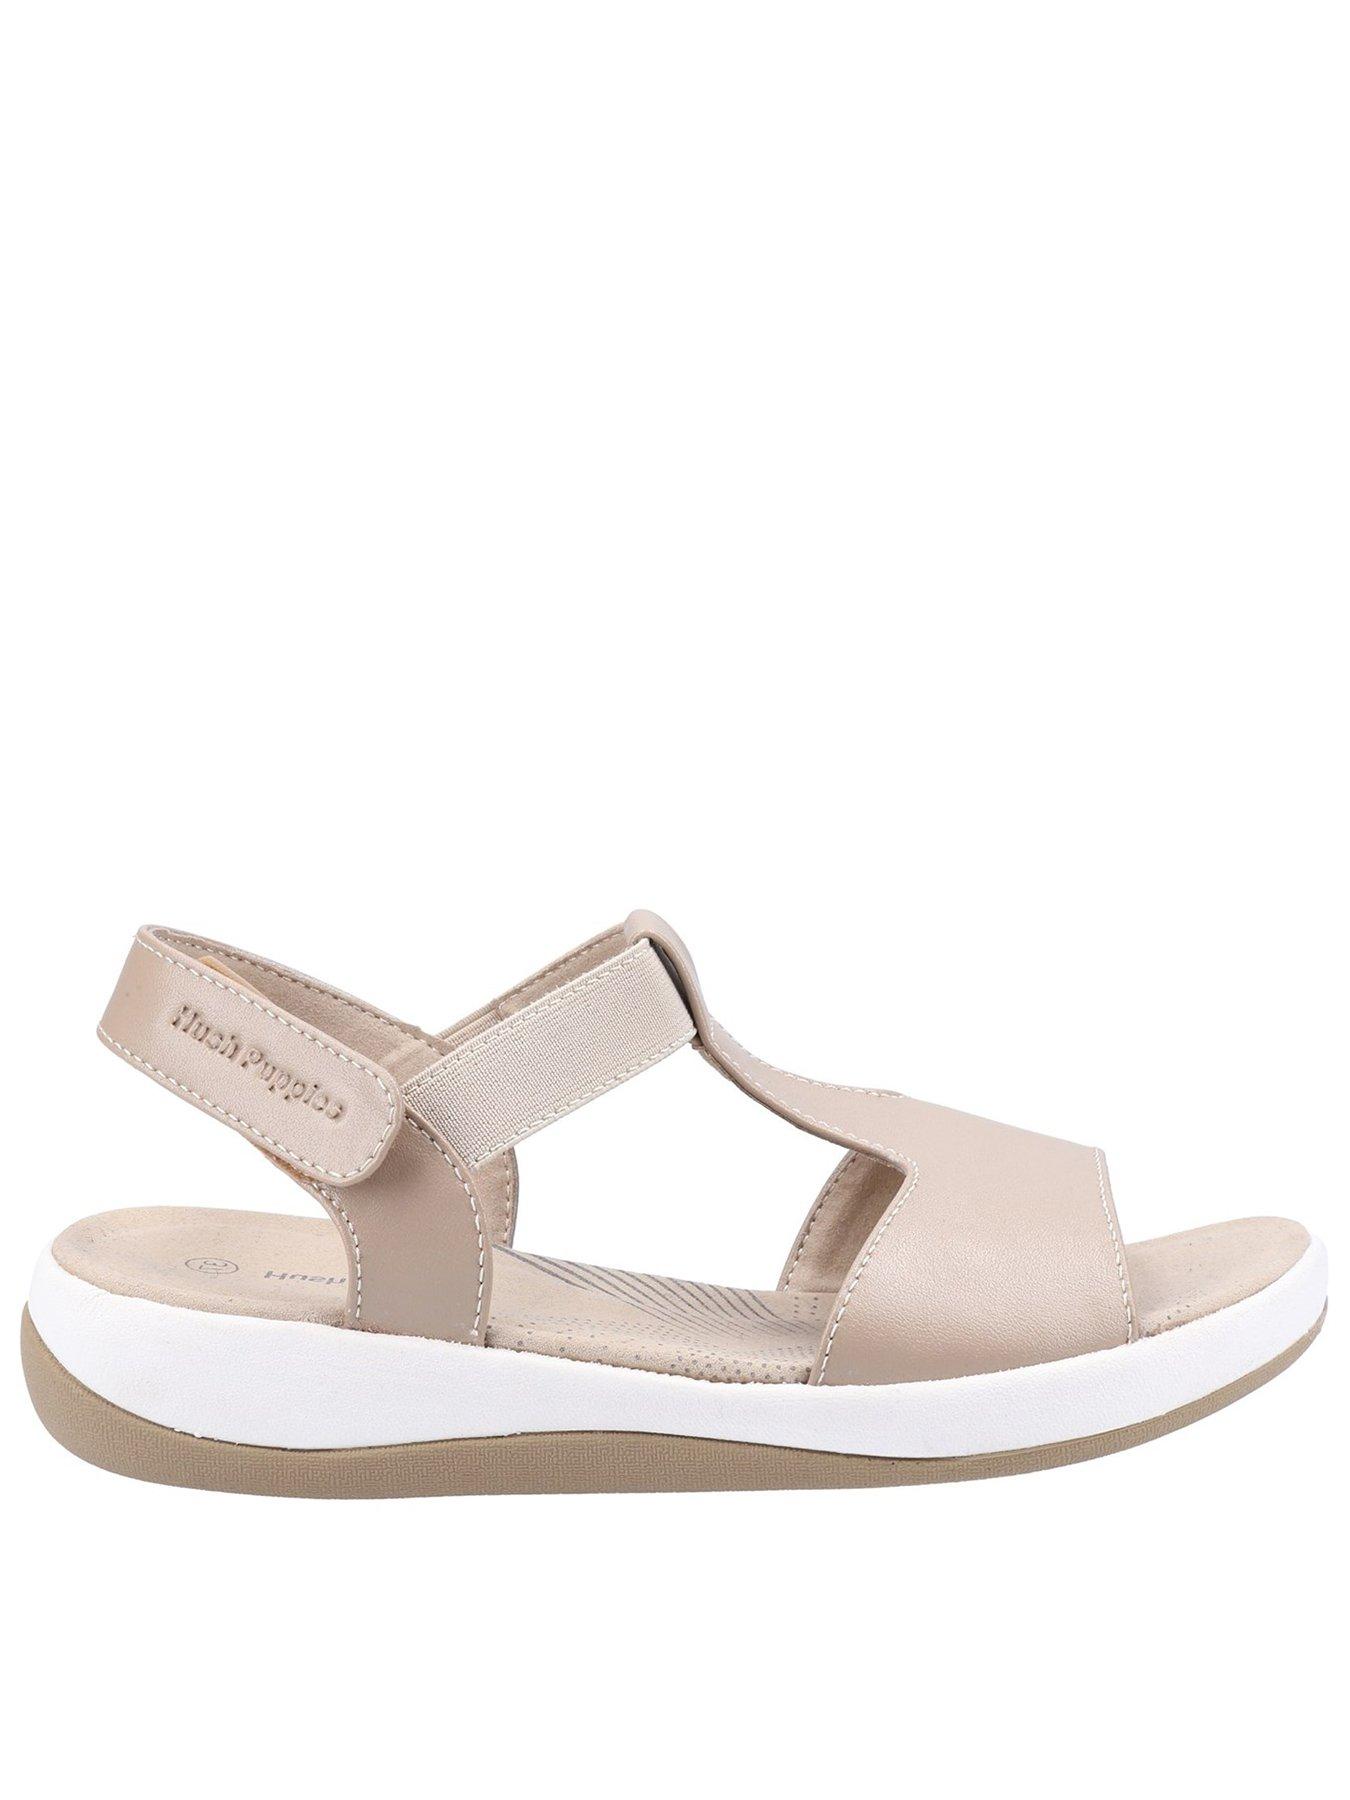 Hush Puppies Sylvie Wedge Sandal - Taupe | very.co.uk